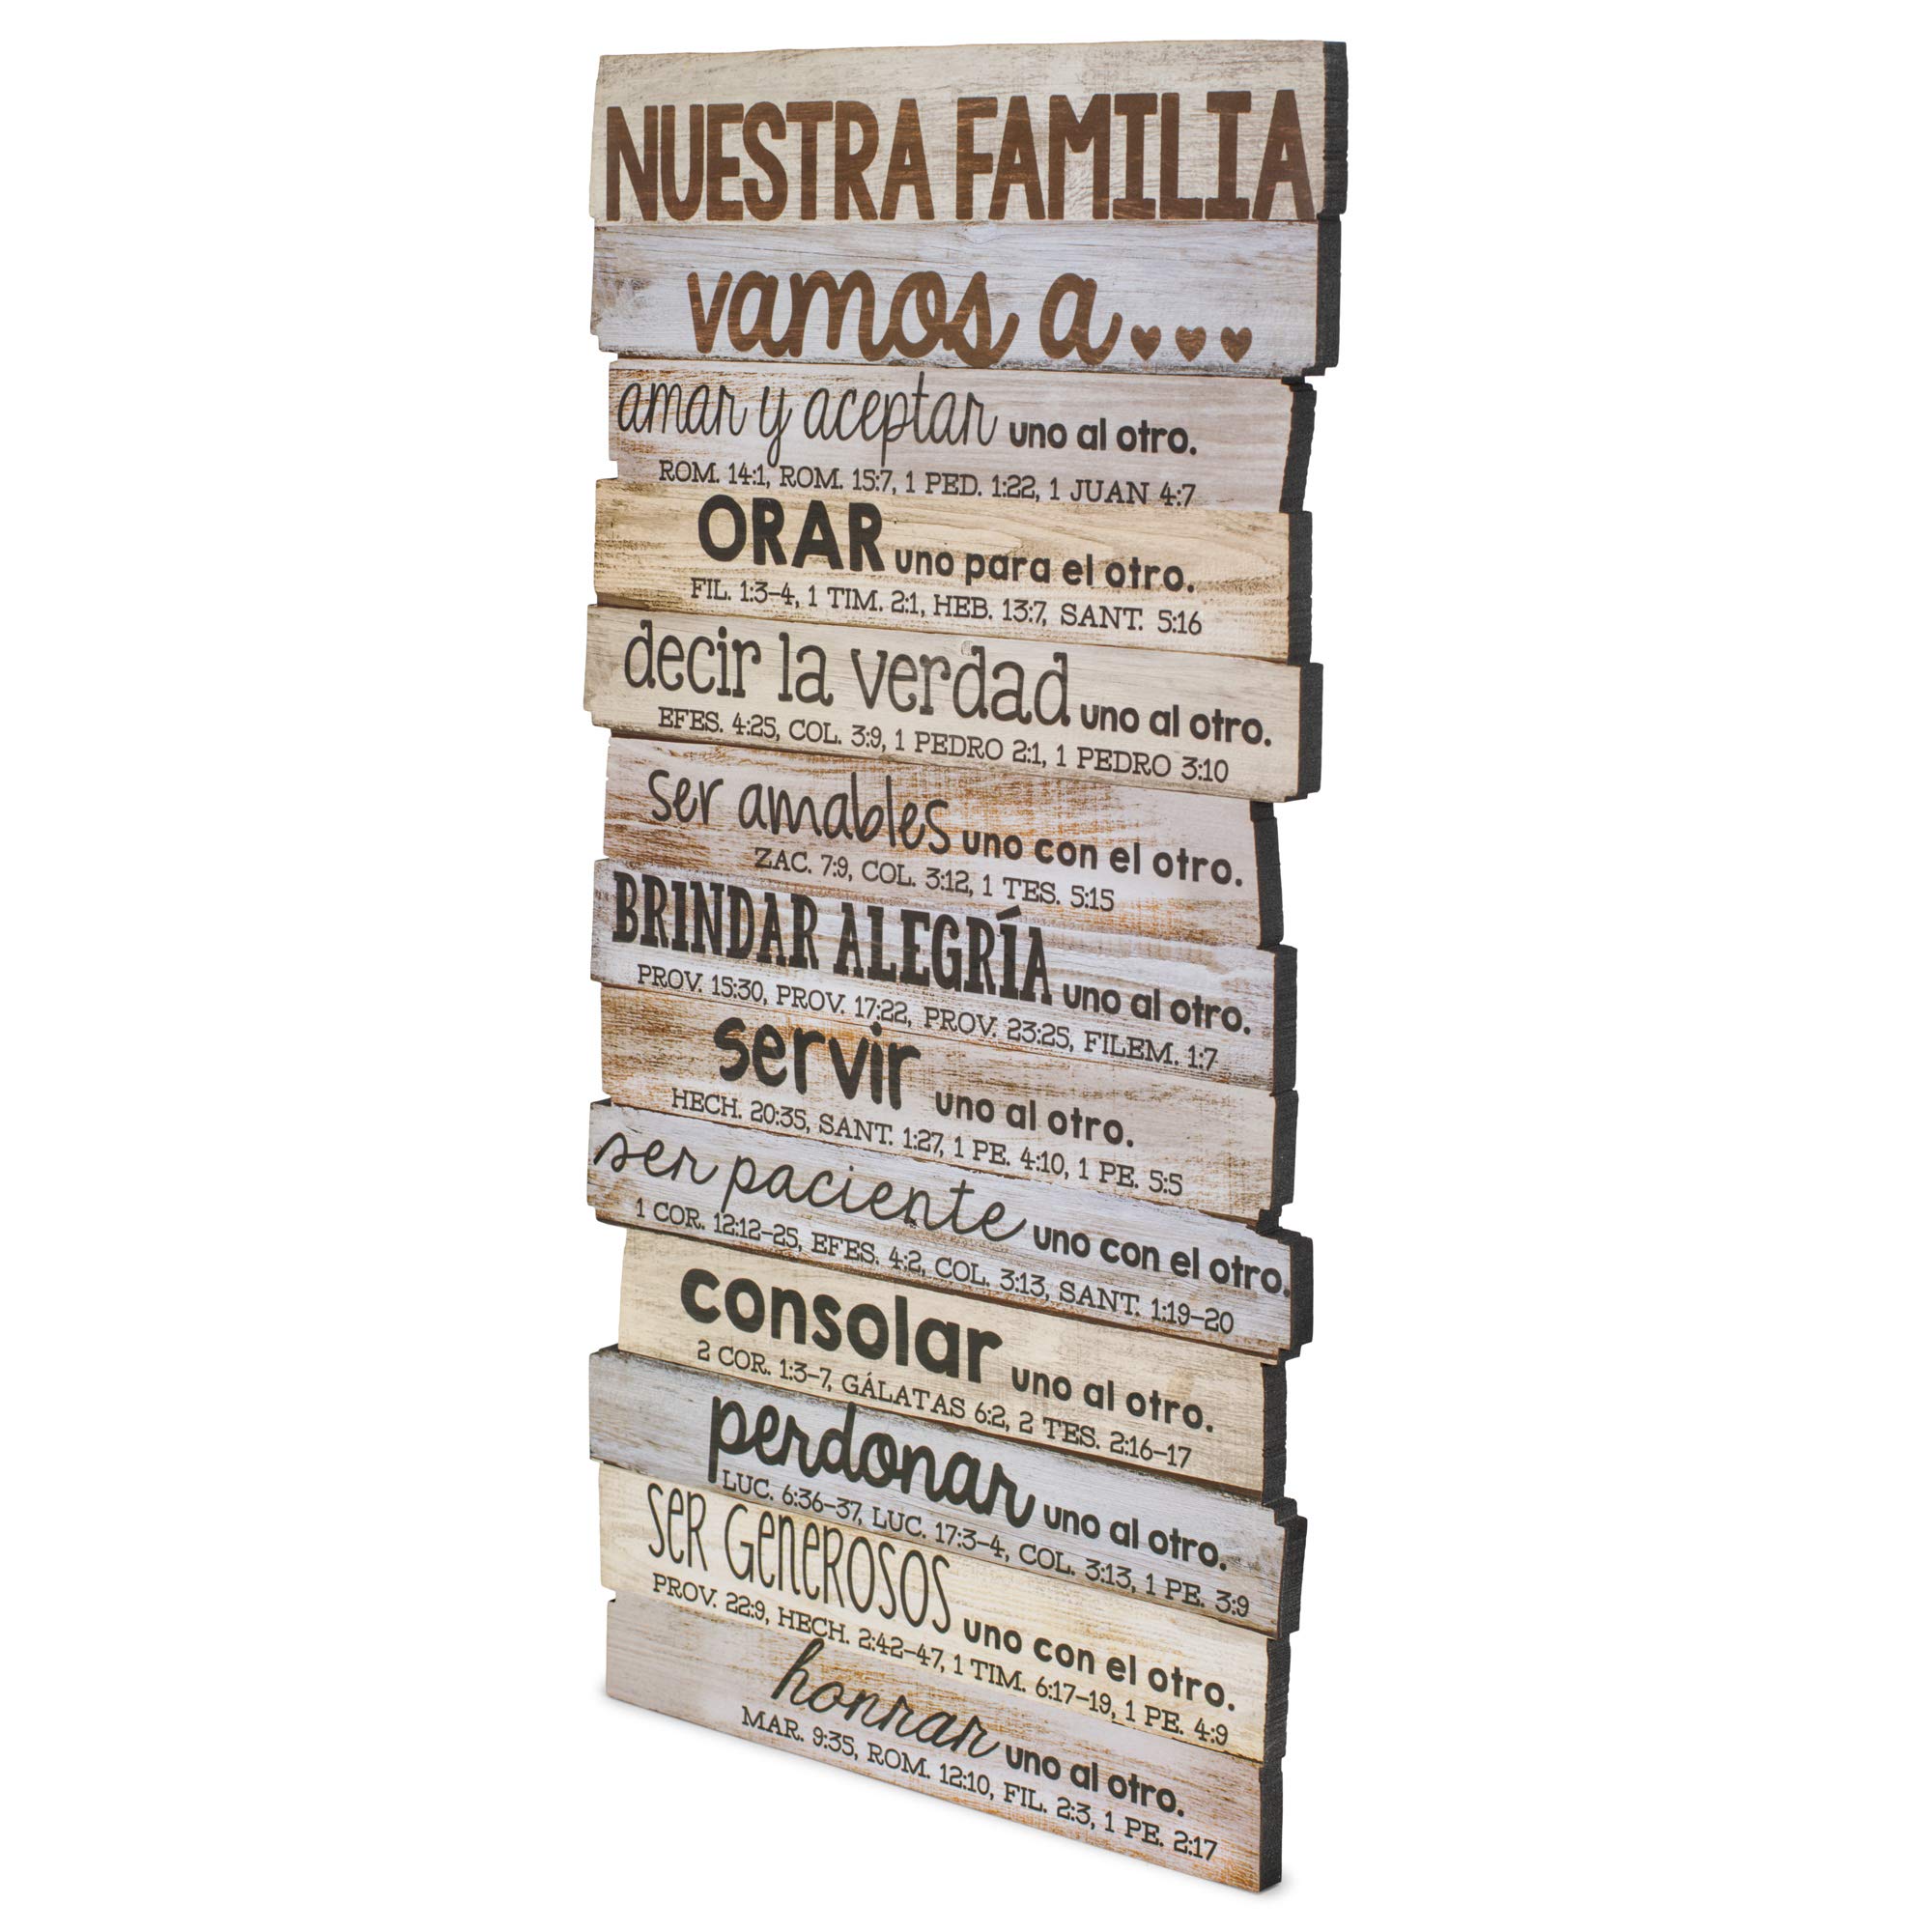 Lighthouse Christian Products Nuestra Familia, Our Family Rustic Stacked Pallet 5 X 10 Wood Desktop Plaque